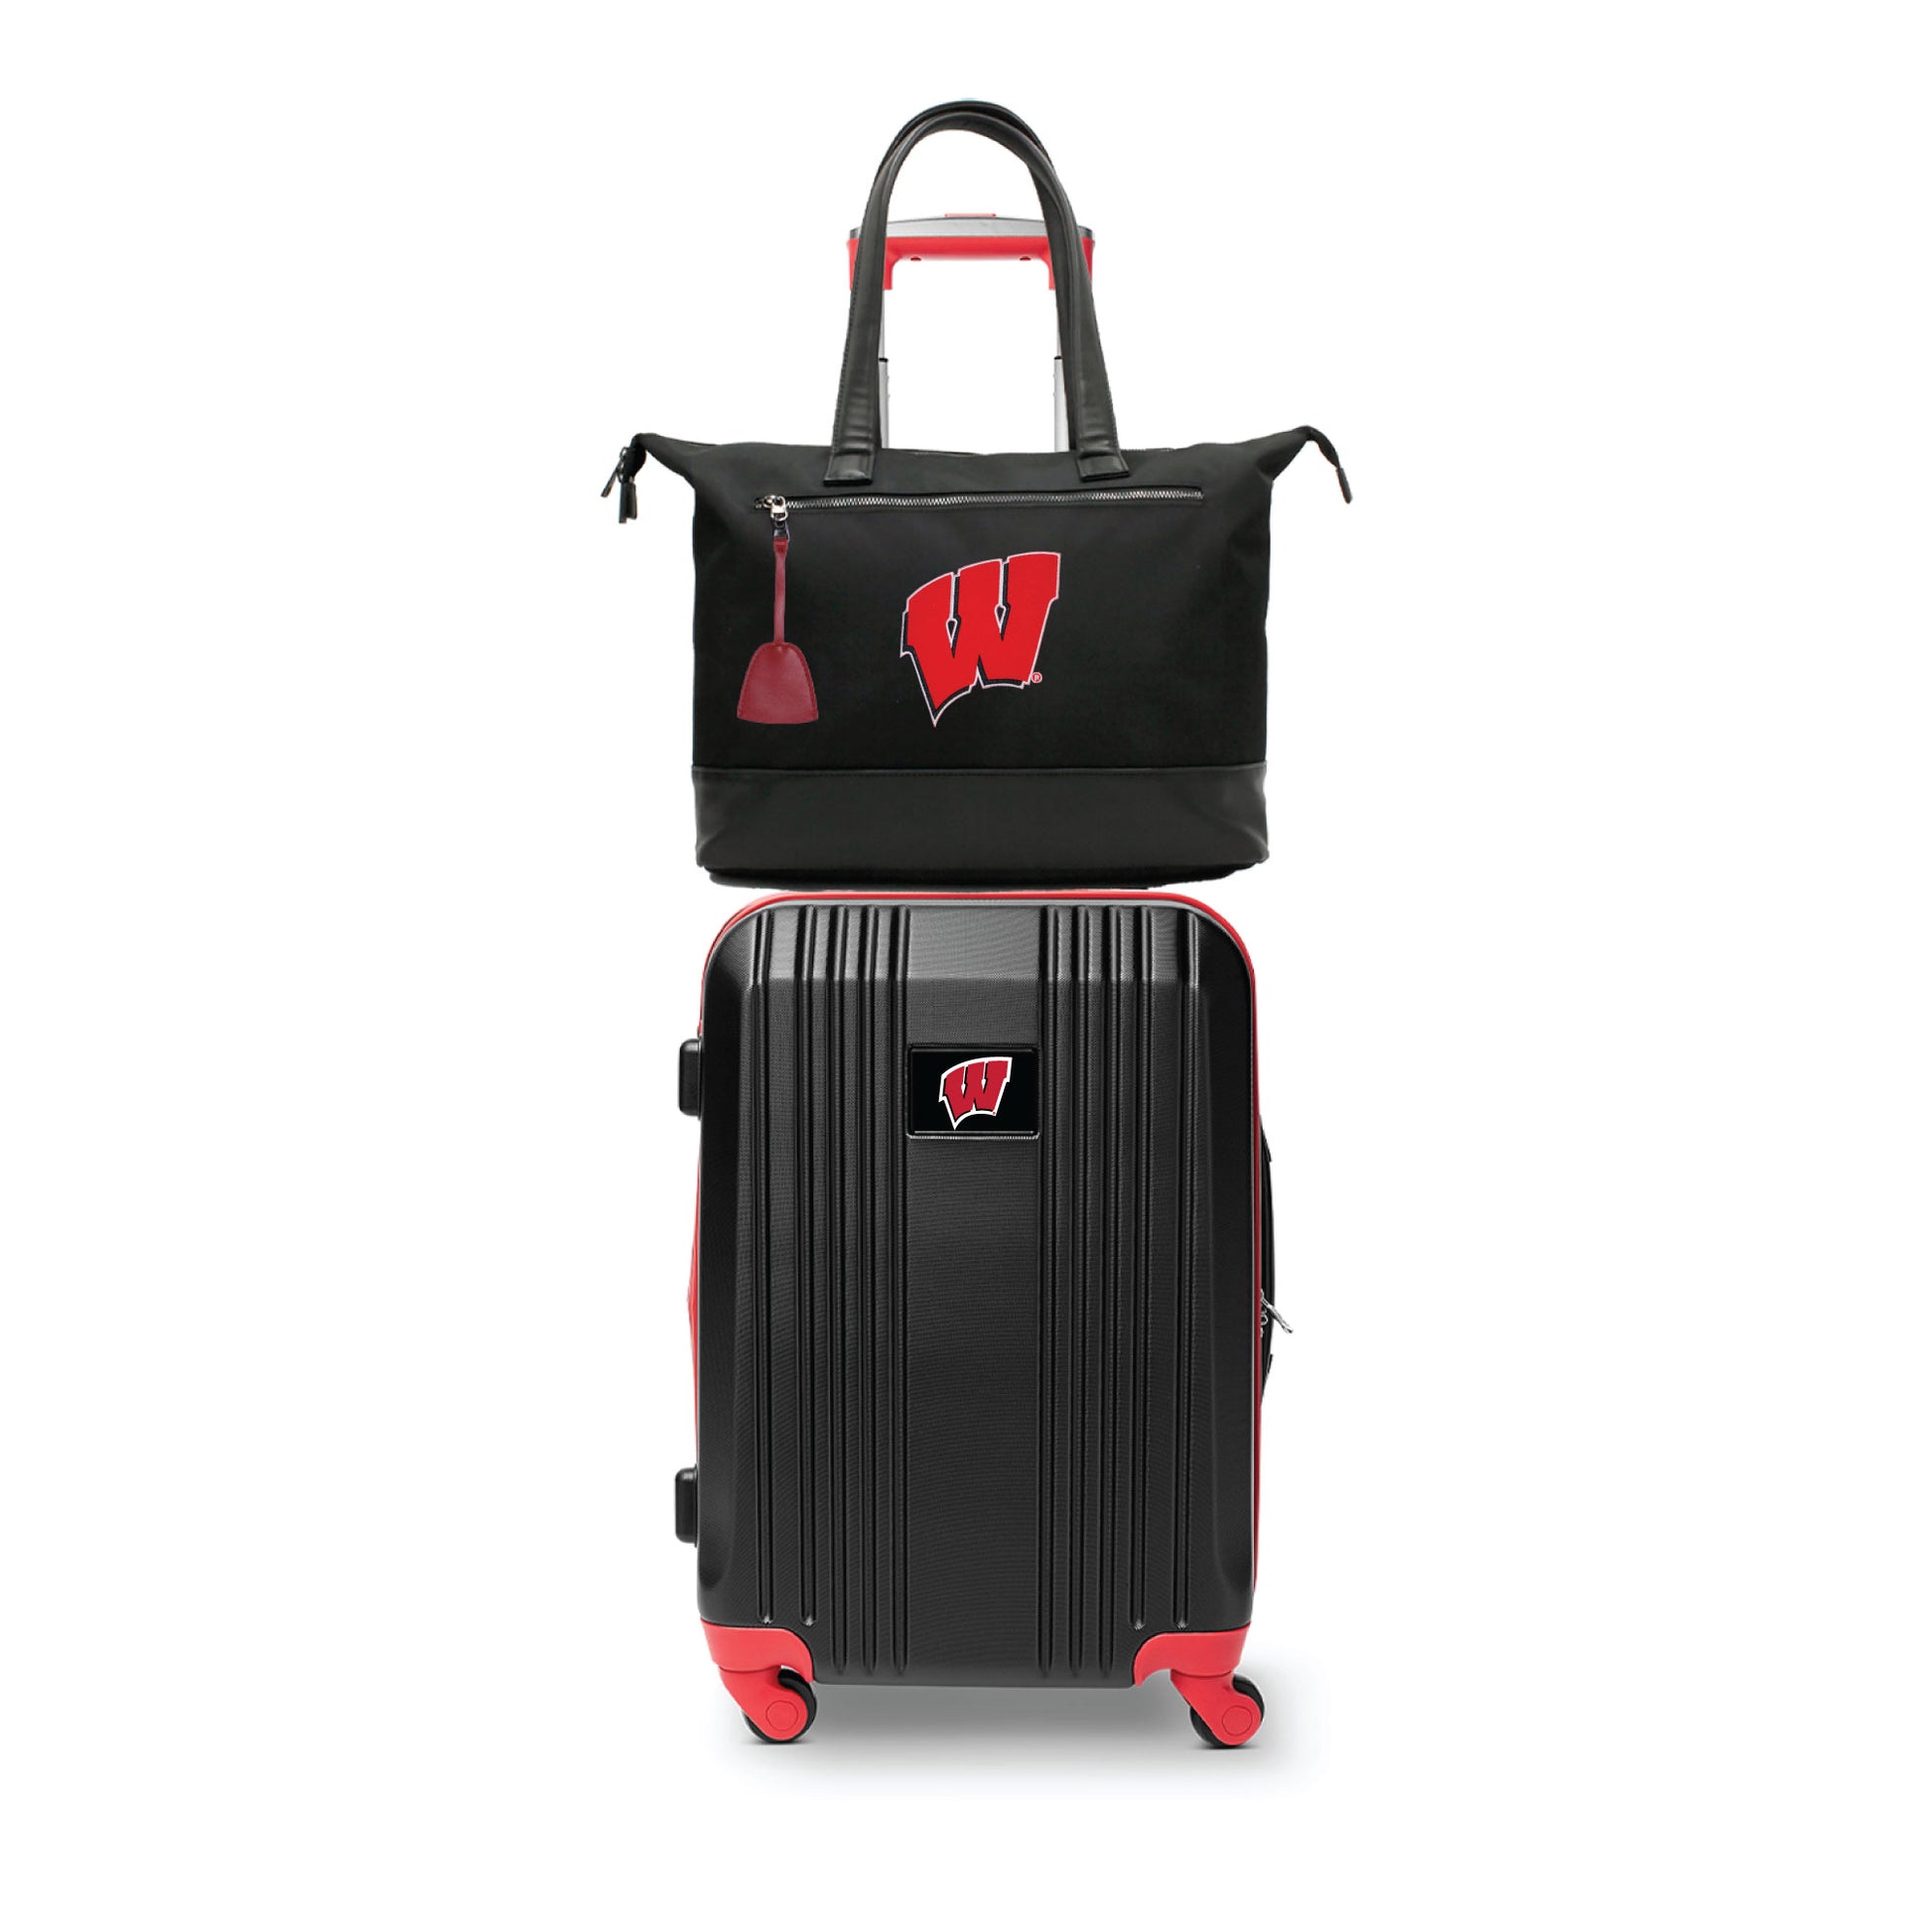 Wisconsin Badgers Premium Laptop Tote Bag and Luggage Set